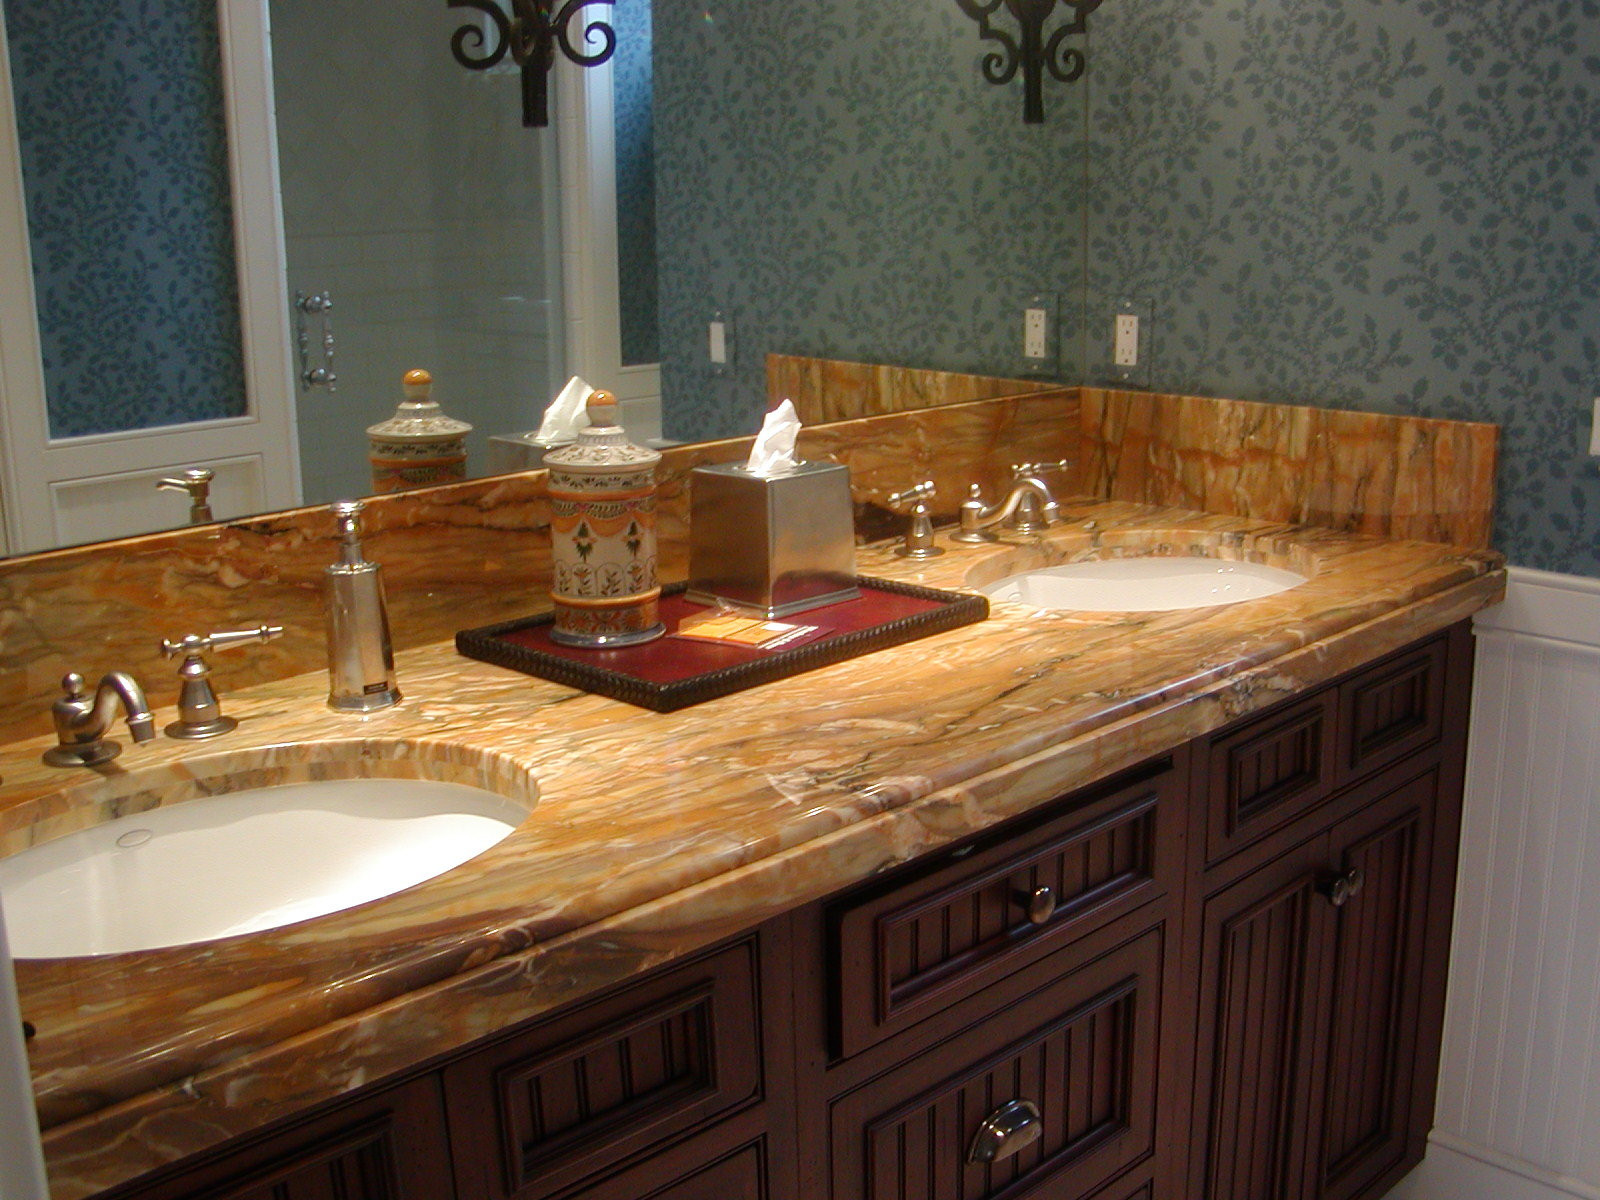 Marble Bathroom Sink Countertop
 Selecting a sink for your countertop